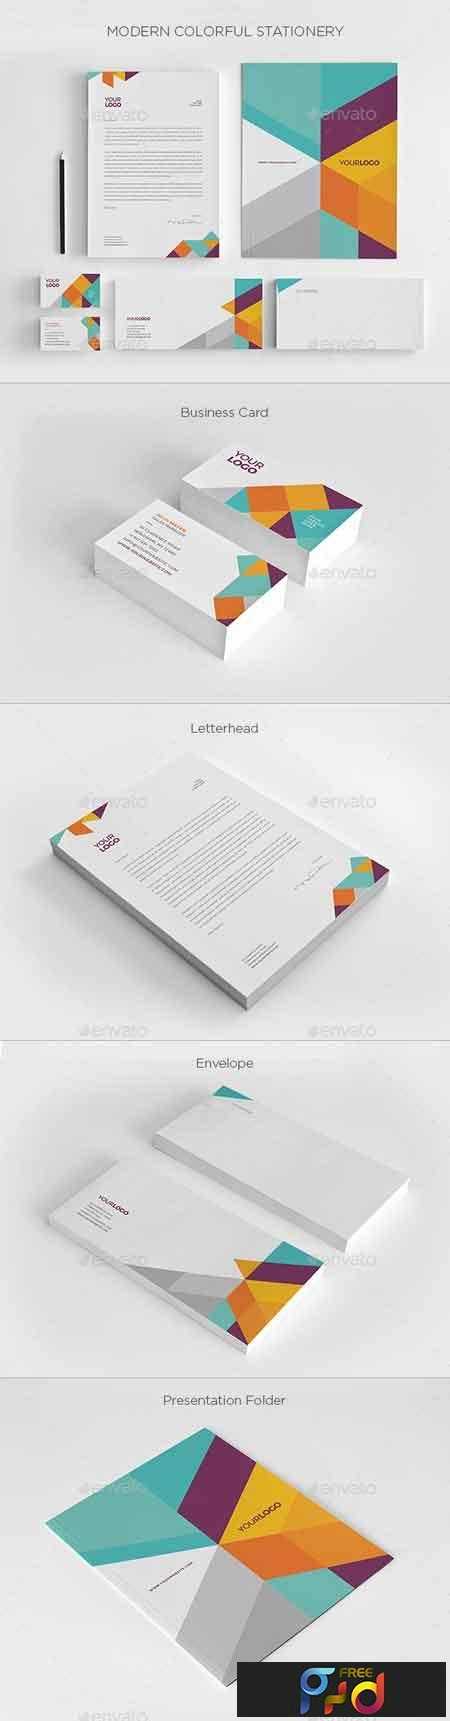 1809296 Modern Colorful Stationery 7717605 1